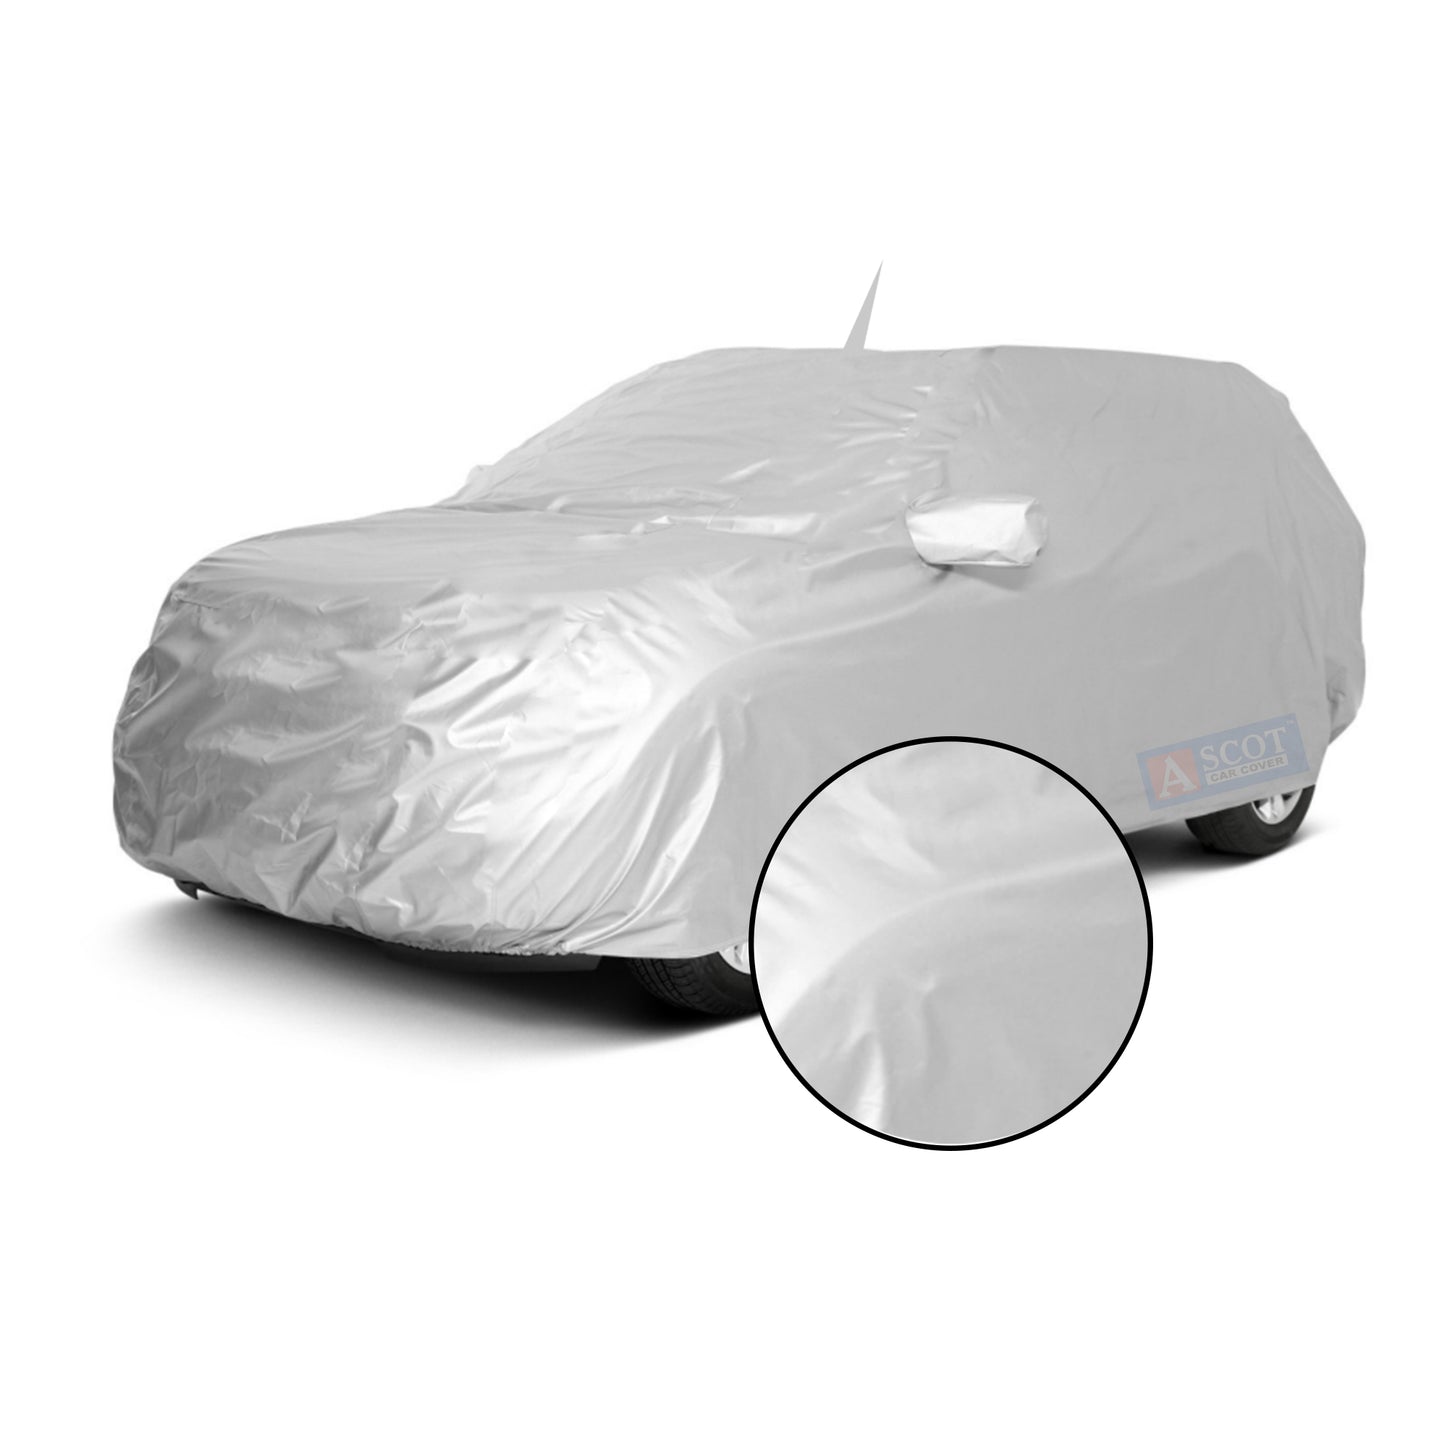 Ascot Tata Punch 2021-2023 Model Car Body Cover Dust Proof, Trippel Stitched